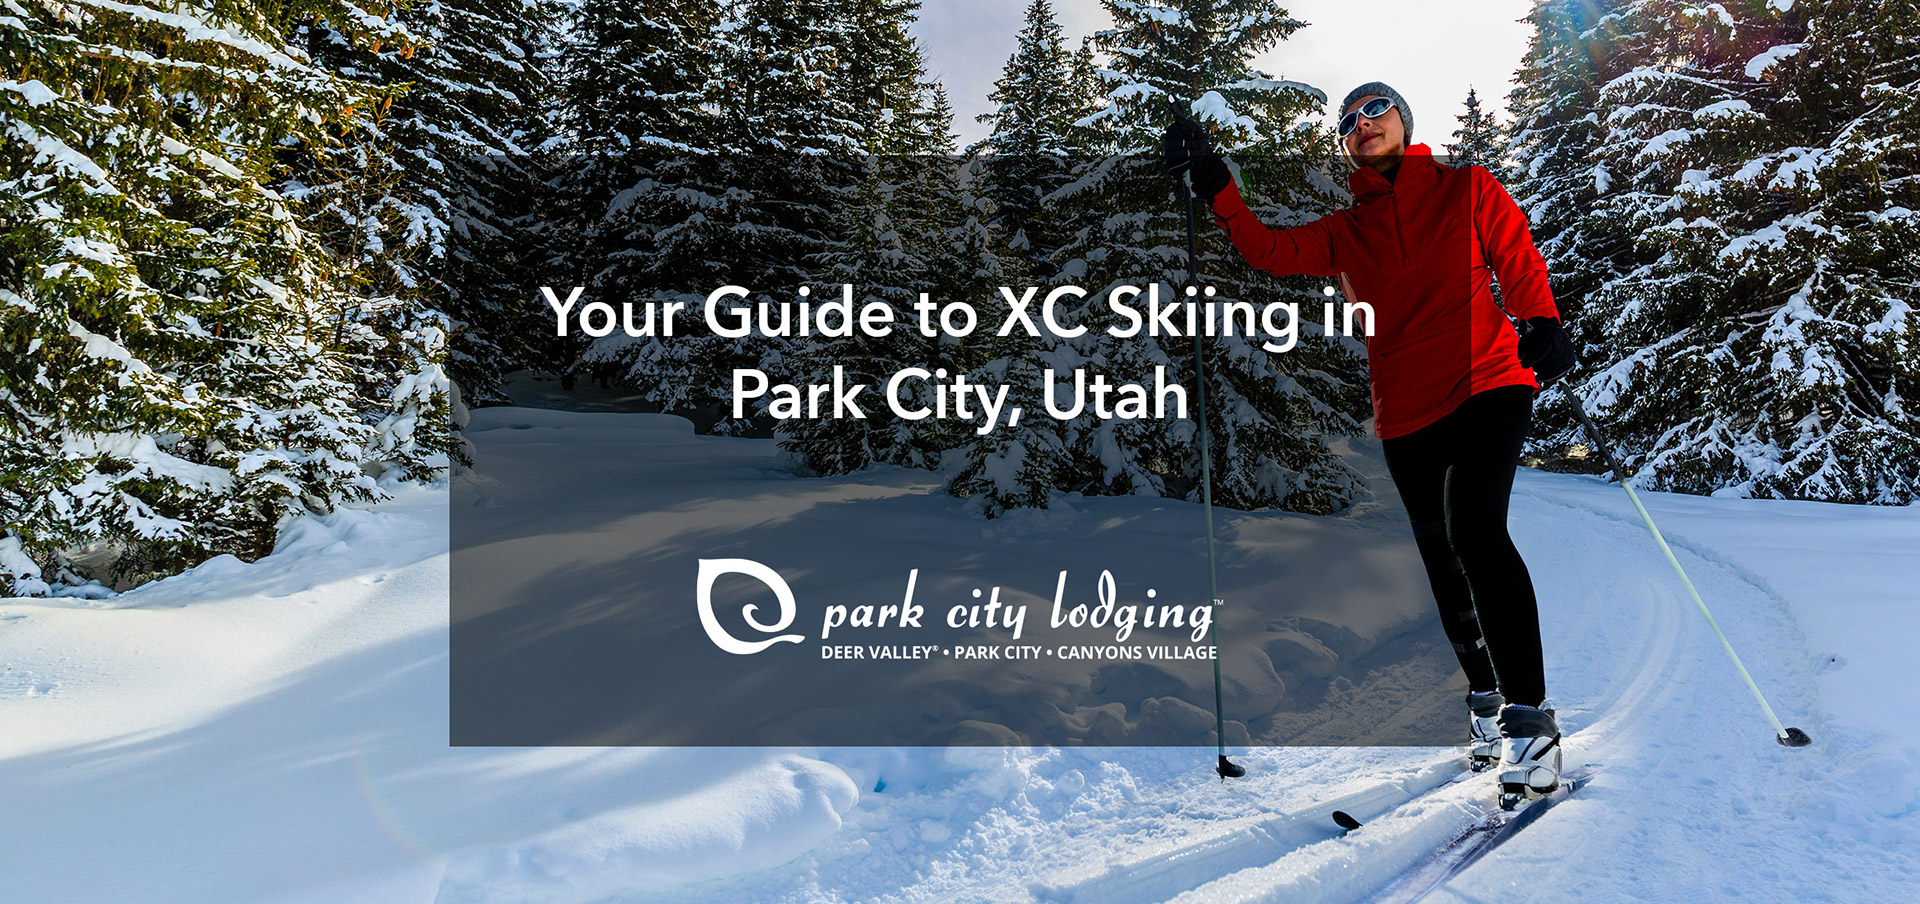 A guide to cross country skiing in park city